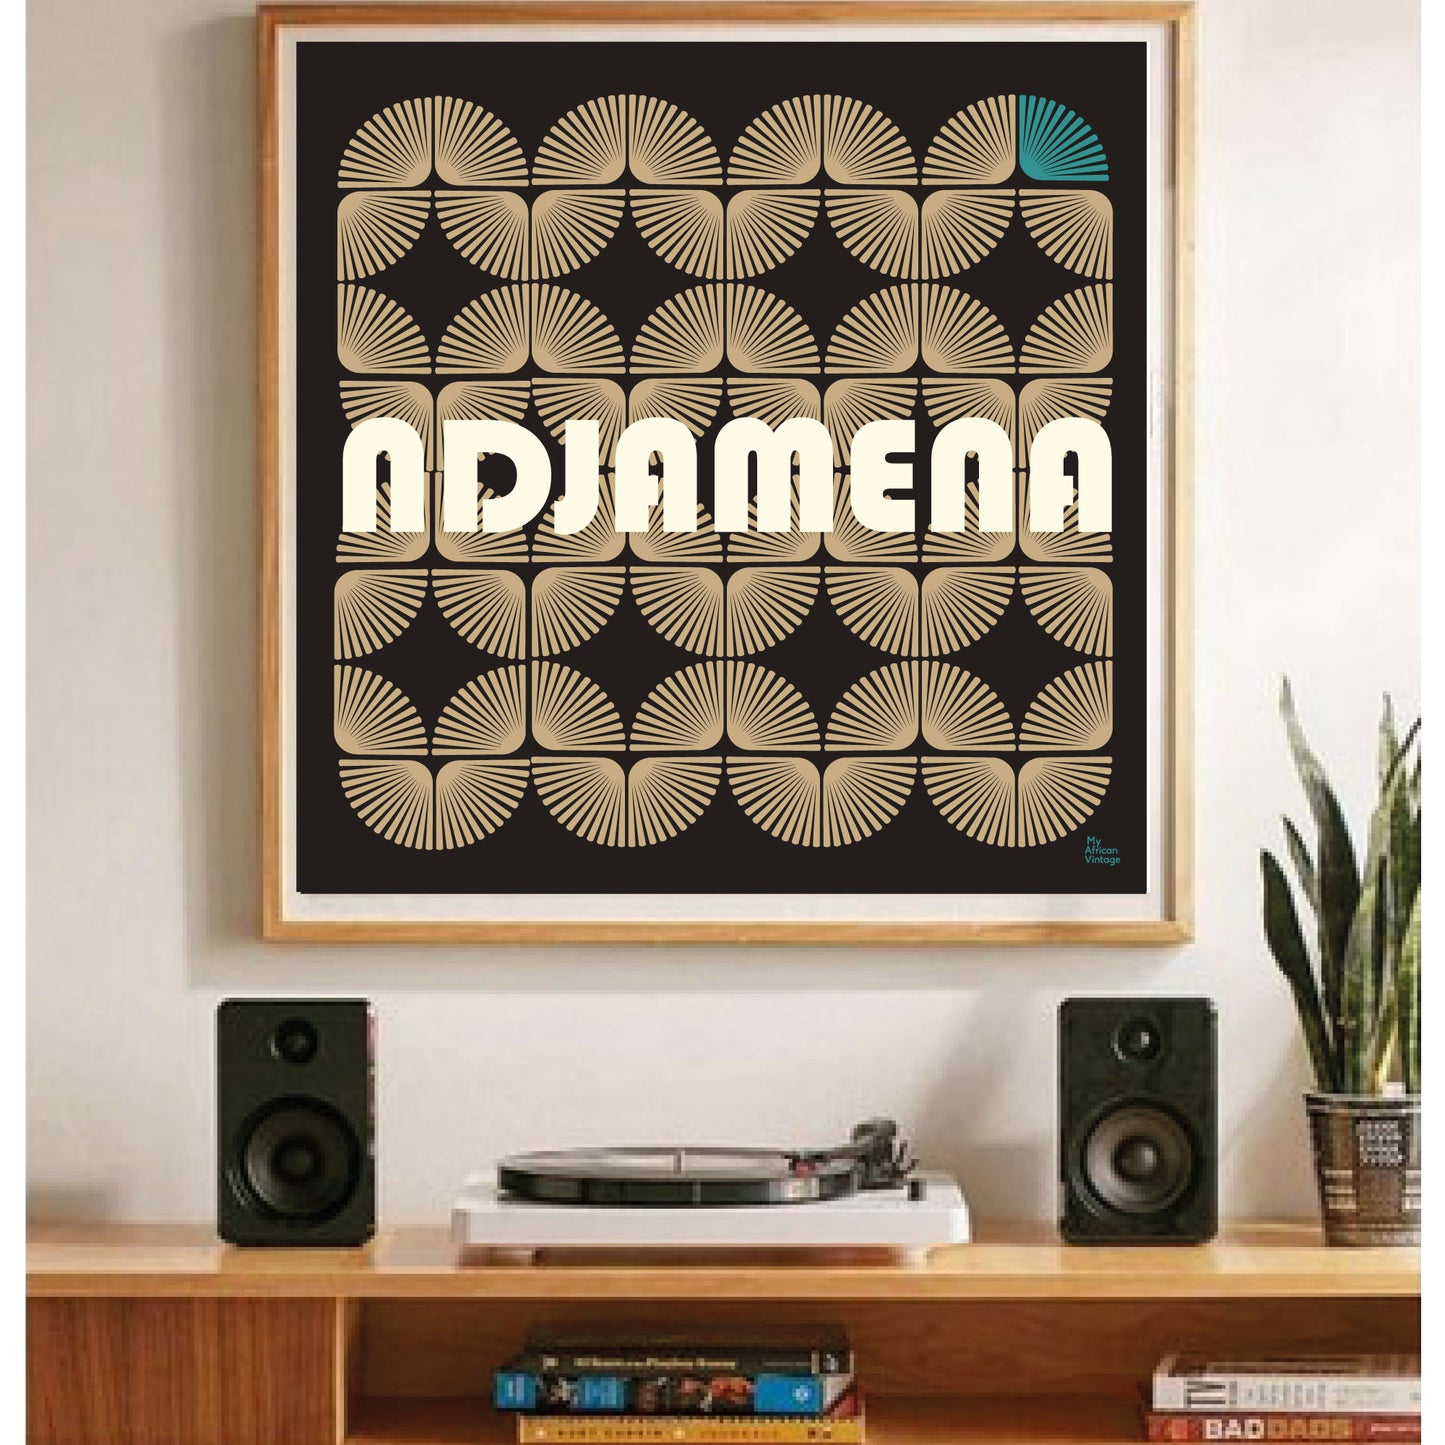 Affiche style rétro "Ndjamena" -  collection "My African Vintage"